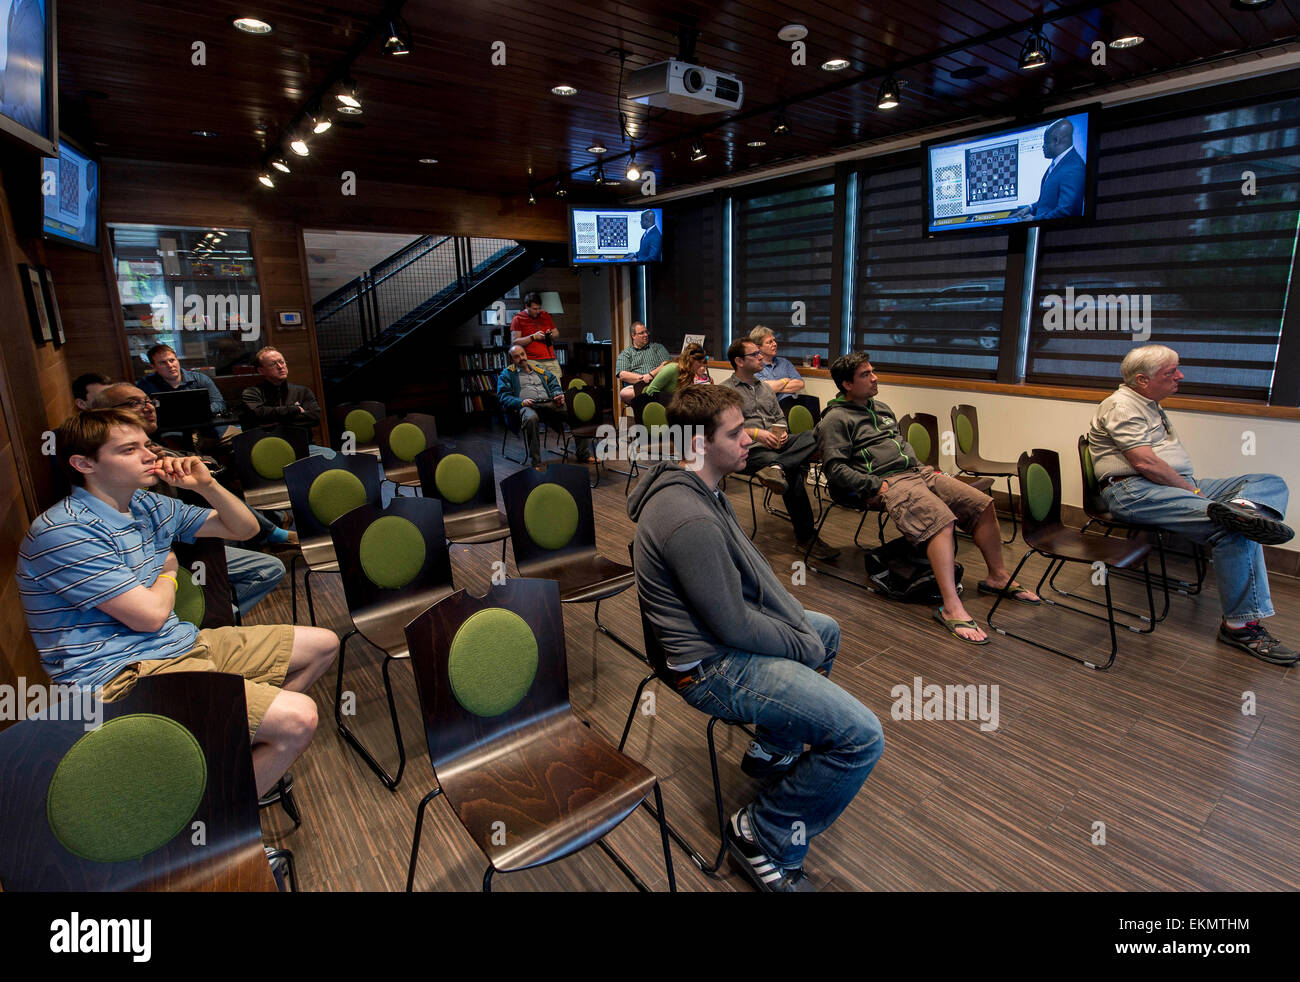 St. Louis, Missouri, USA. 12th Apr, 2015. Spectators watch a live streaming video feed of the action at the 2015 U.S. Chess Championships. Hosted by the Chess Club and Scholastic Center of St. Louis, the men's and women's championships were won this year by GM Hikaru Nakamura, the number three rated player in the world, and by Irina Krush, now a seven-time winner of the women's championship. Credit:  Brian Cahn/ZUMA Wire/Alamy Live News Stock Photo